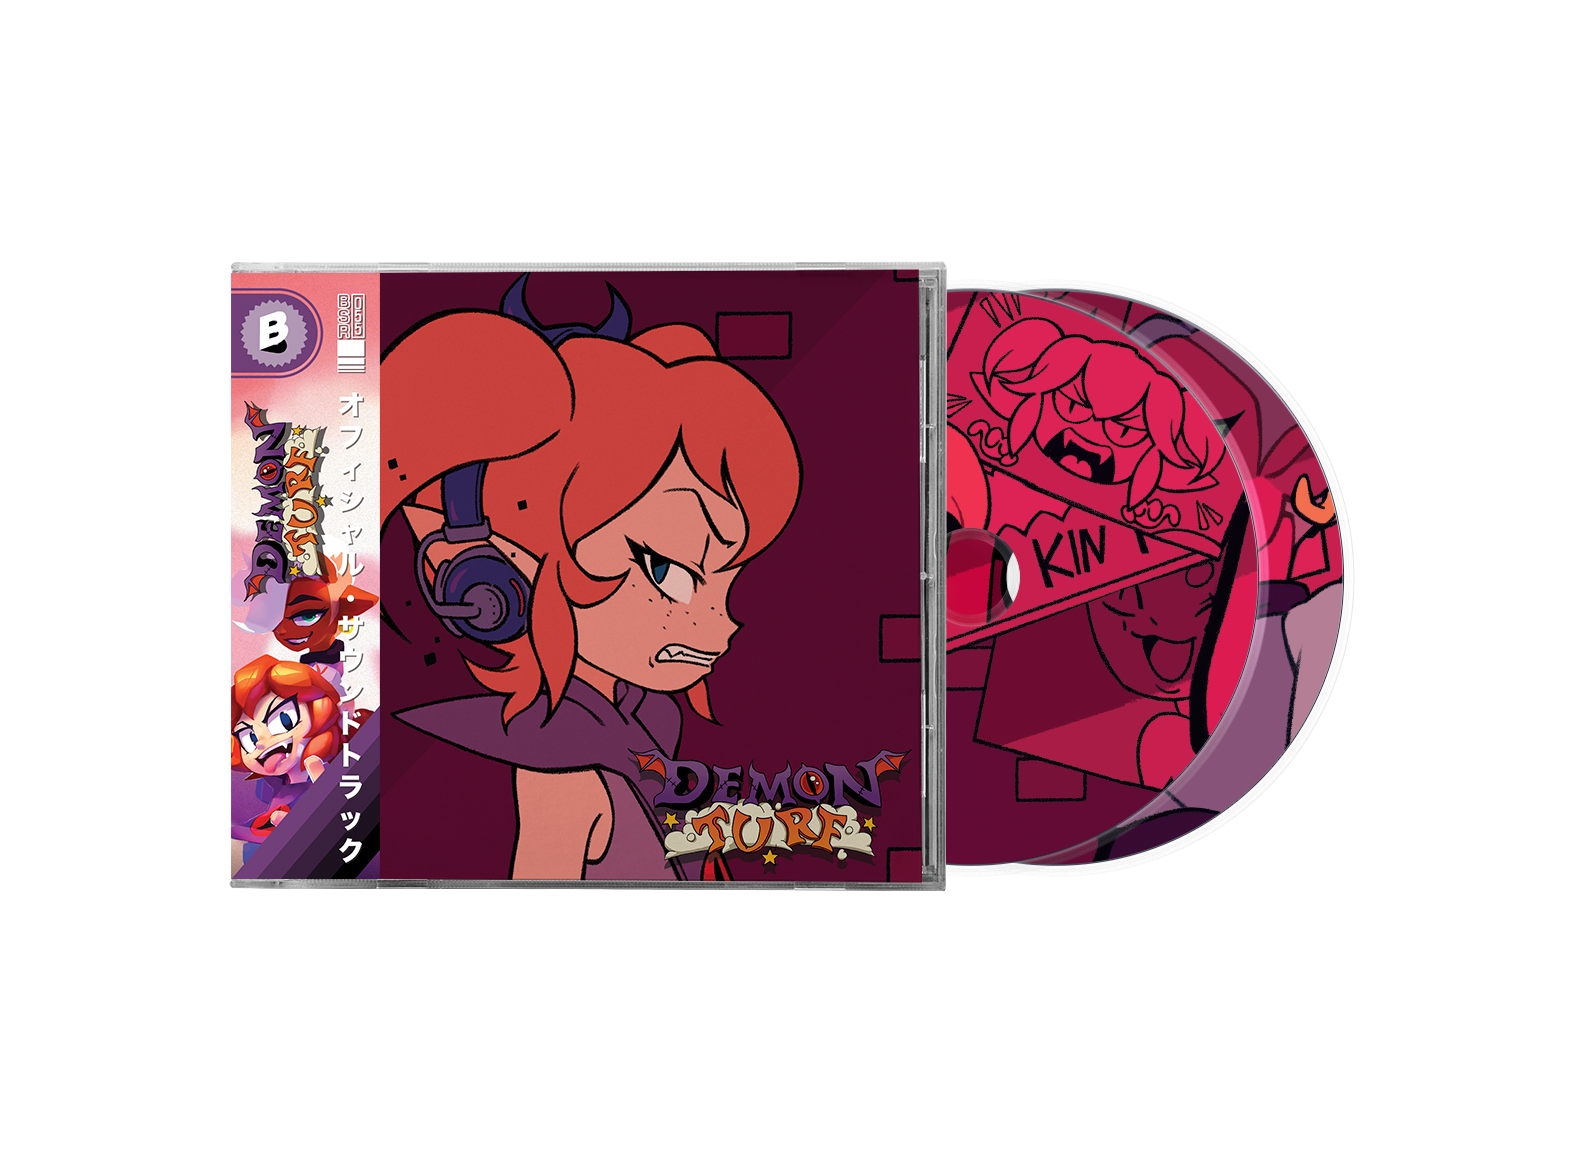 Demon Turf cover and CDs